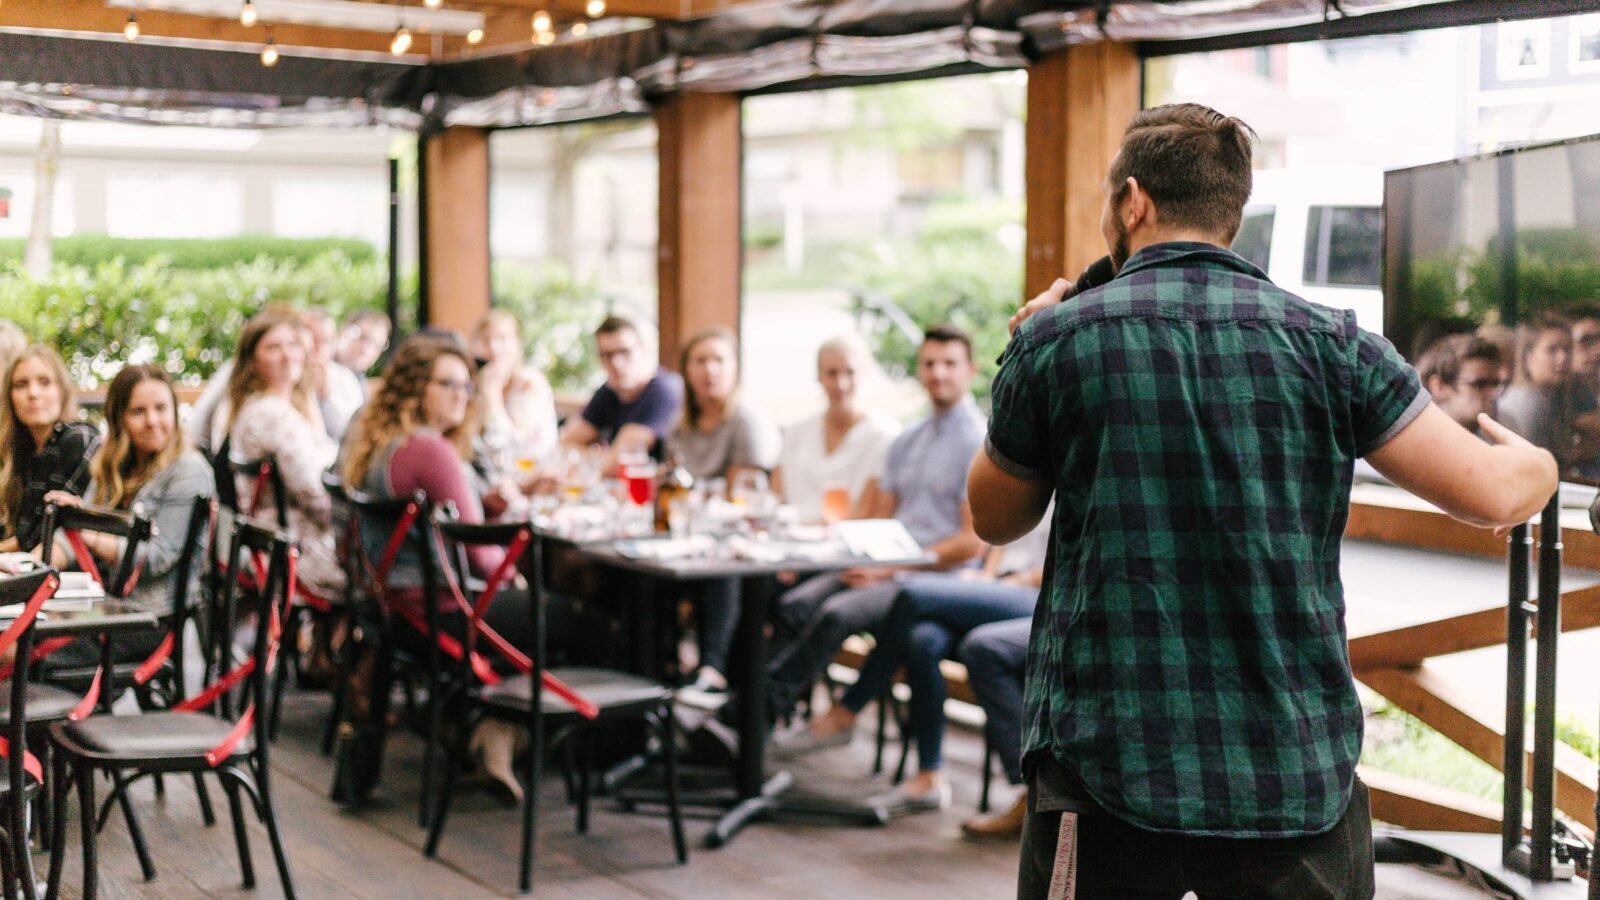 in this photo, a man is speaking into a microphone in front of people seated at long tables during a fun nonprofit event